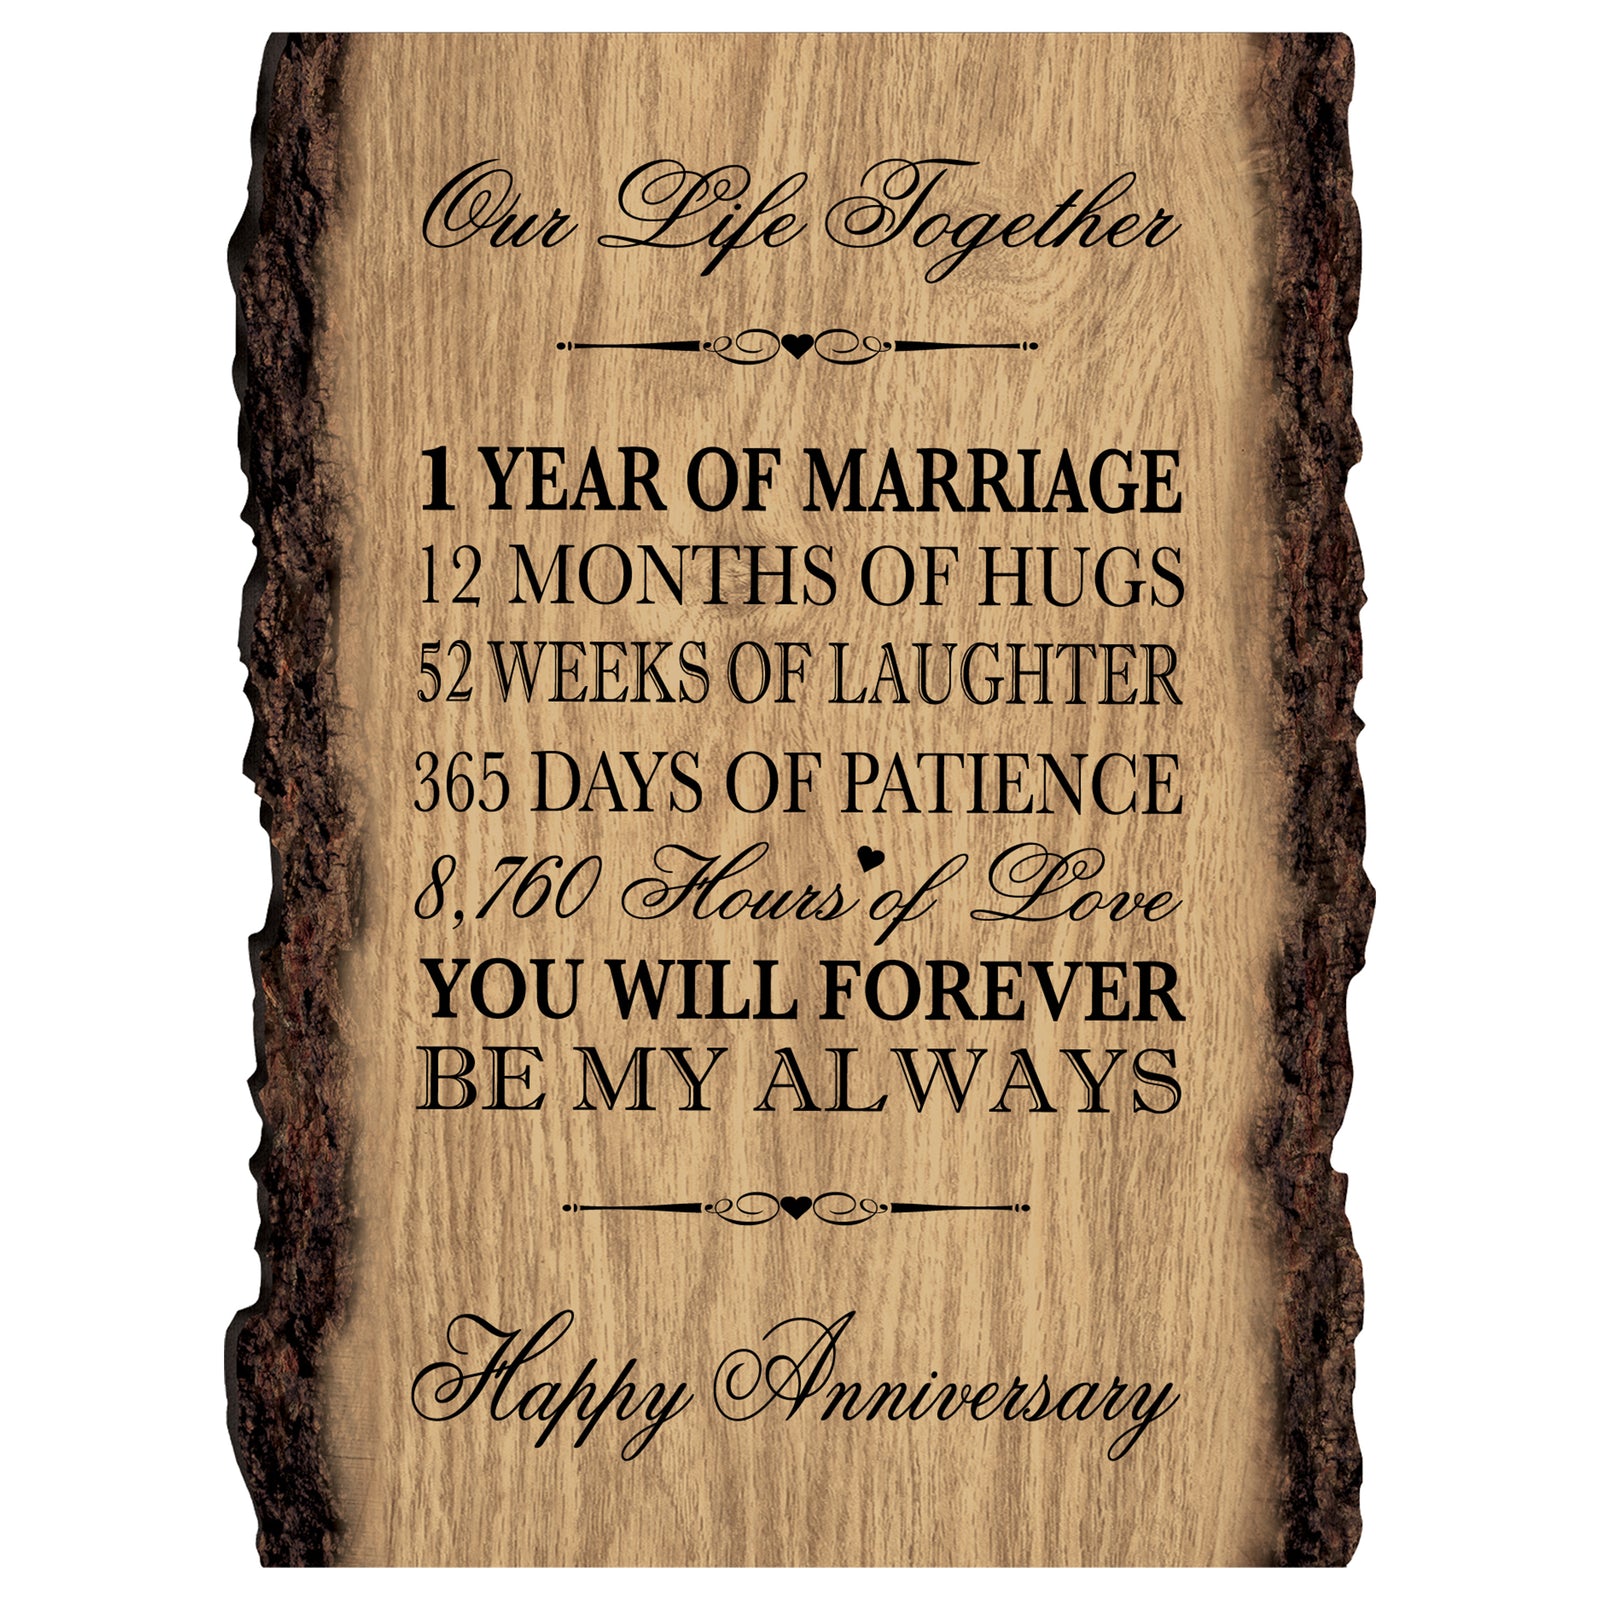 Rustic Wedding Anniversary 9x12 Barky Wall Plaque Gift For Parents, Grandparents New Couple - 1 Year Of Marriage